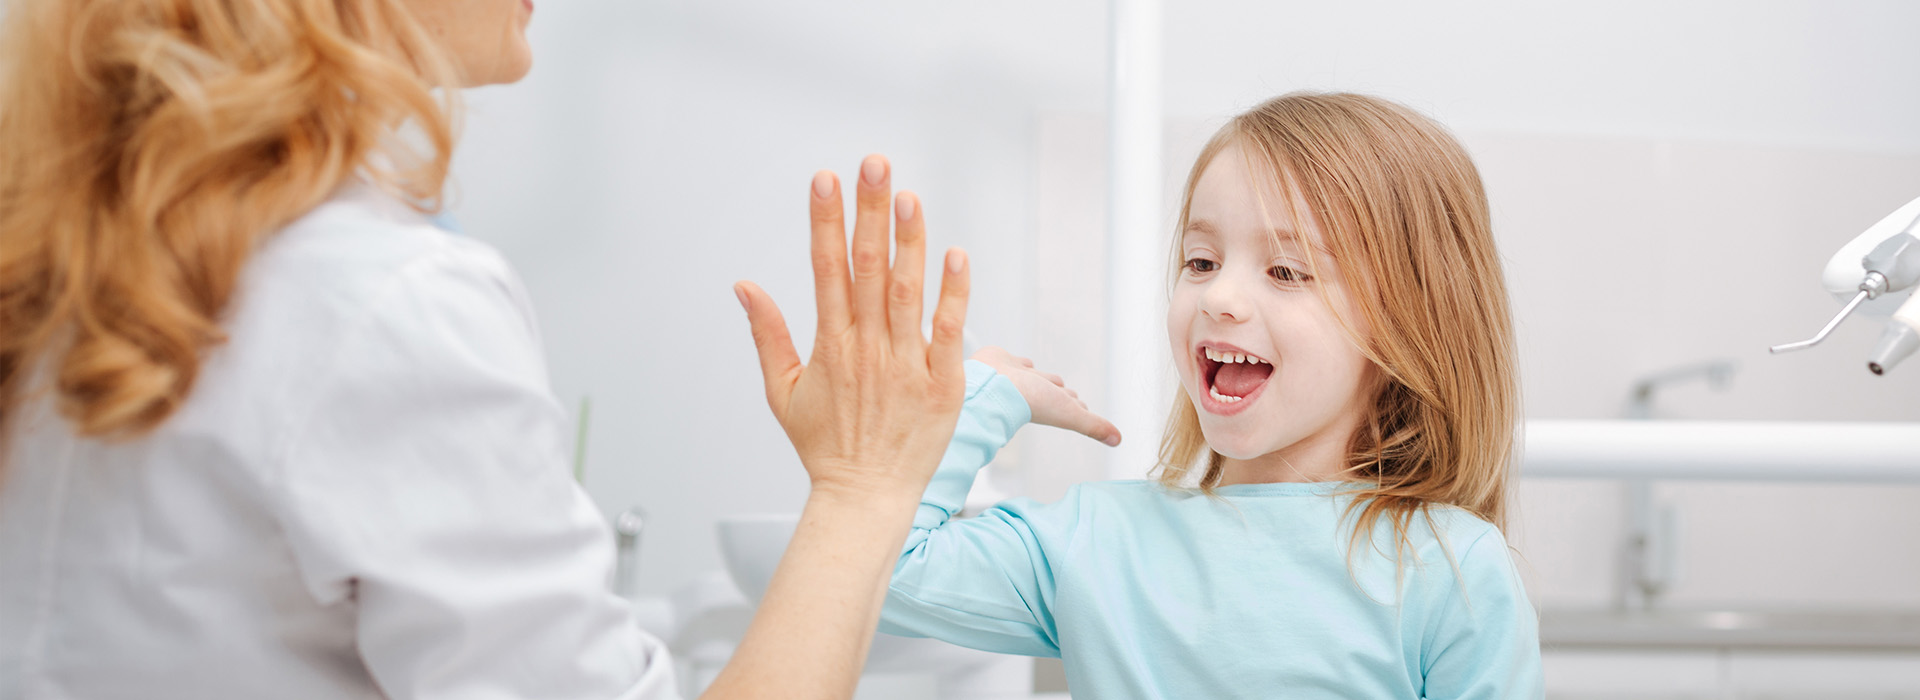 Village Dental | Pediatric Dentistry, Nitrous Oxide and Cosmetic Dentistry